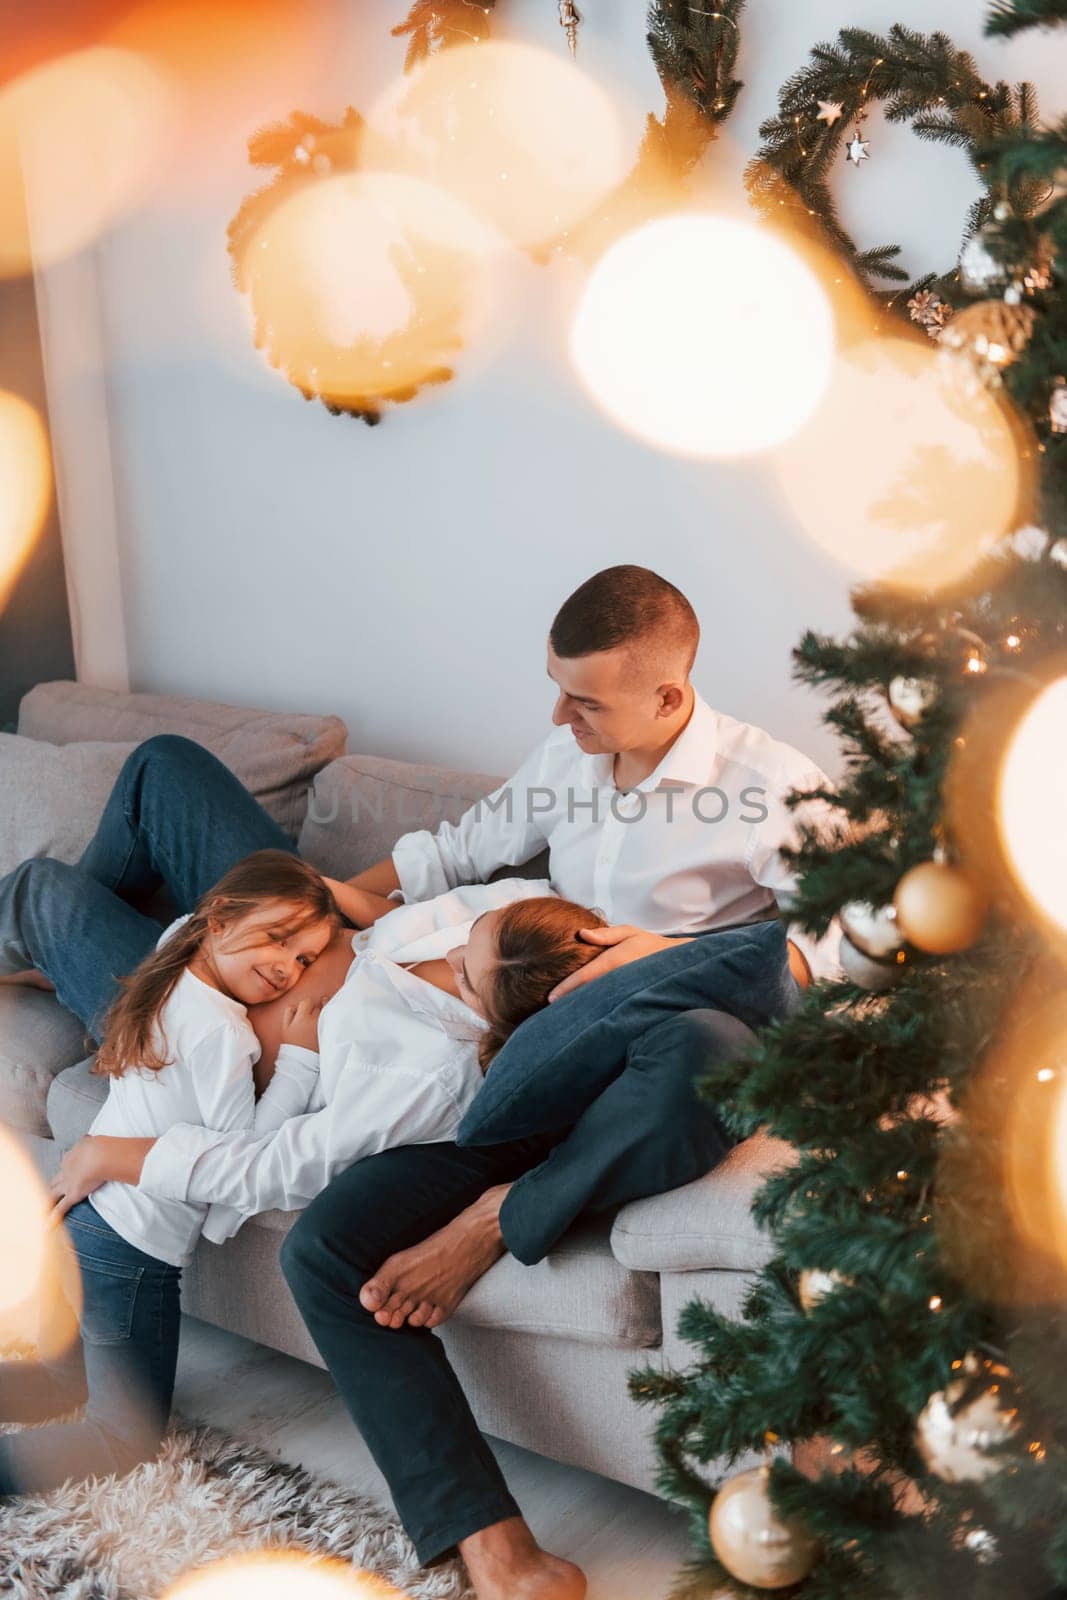 Laying down on the bed. Happy family celebrating holidays indoors together.